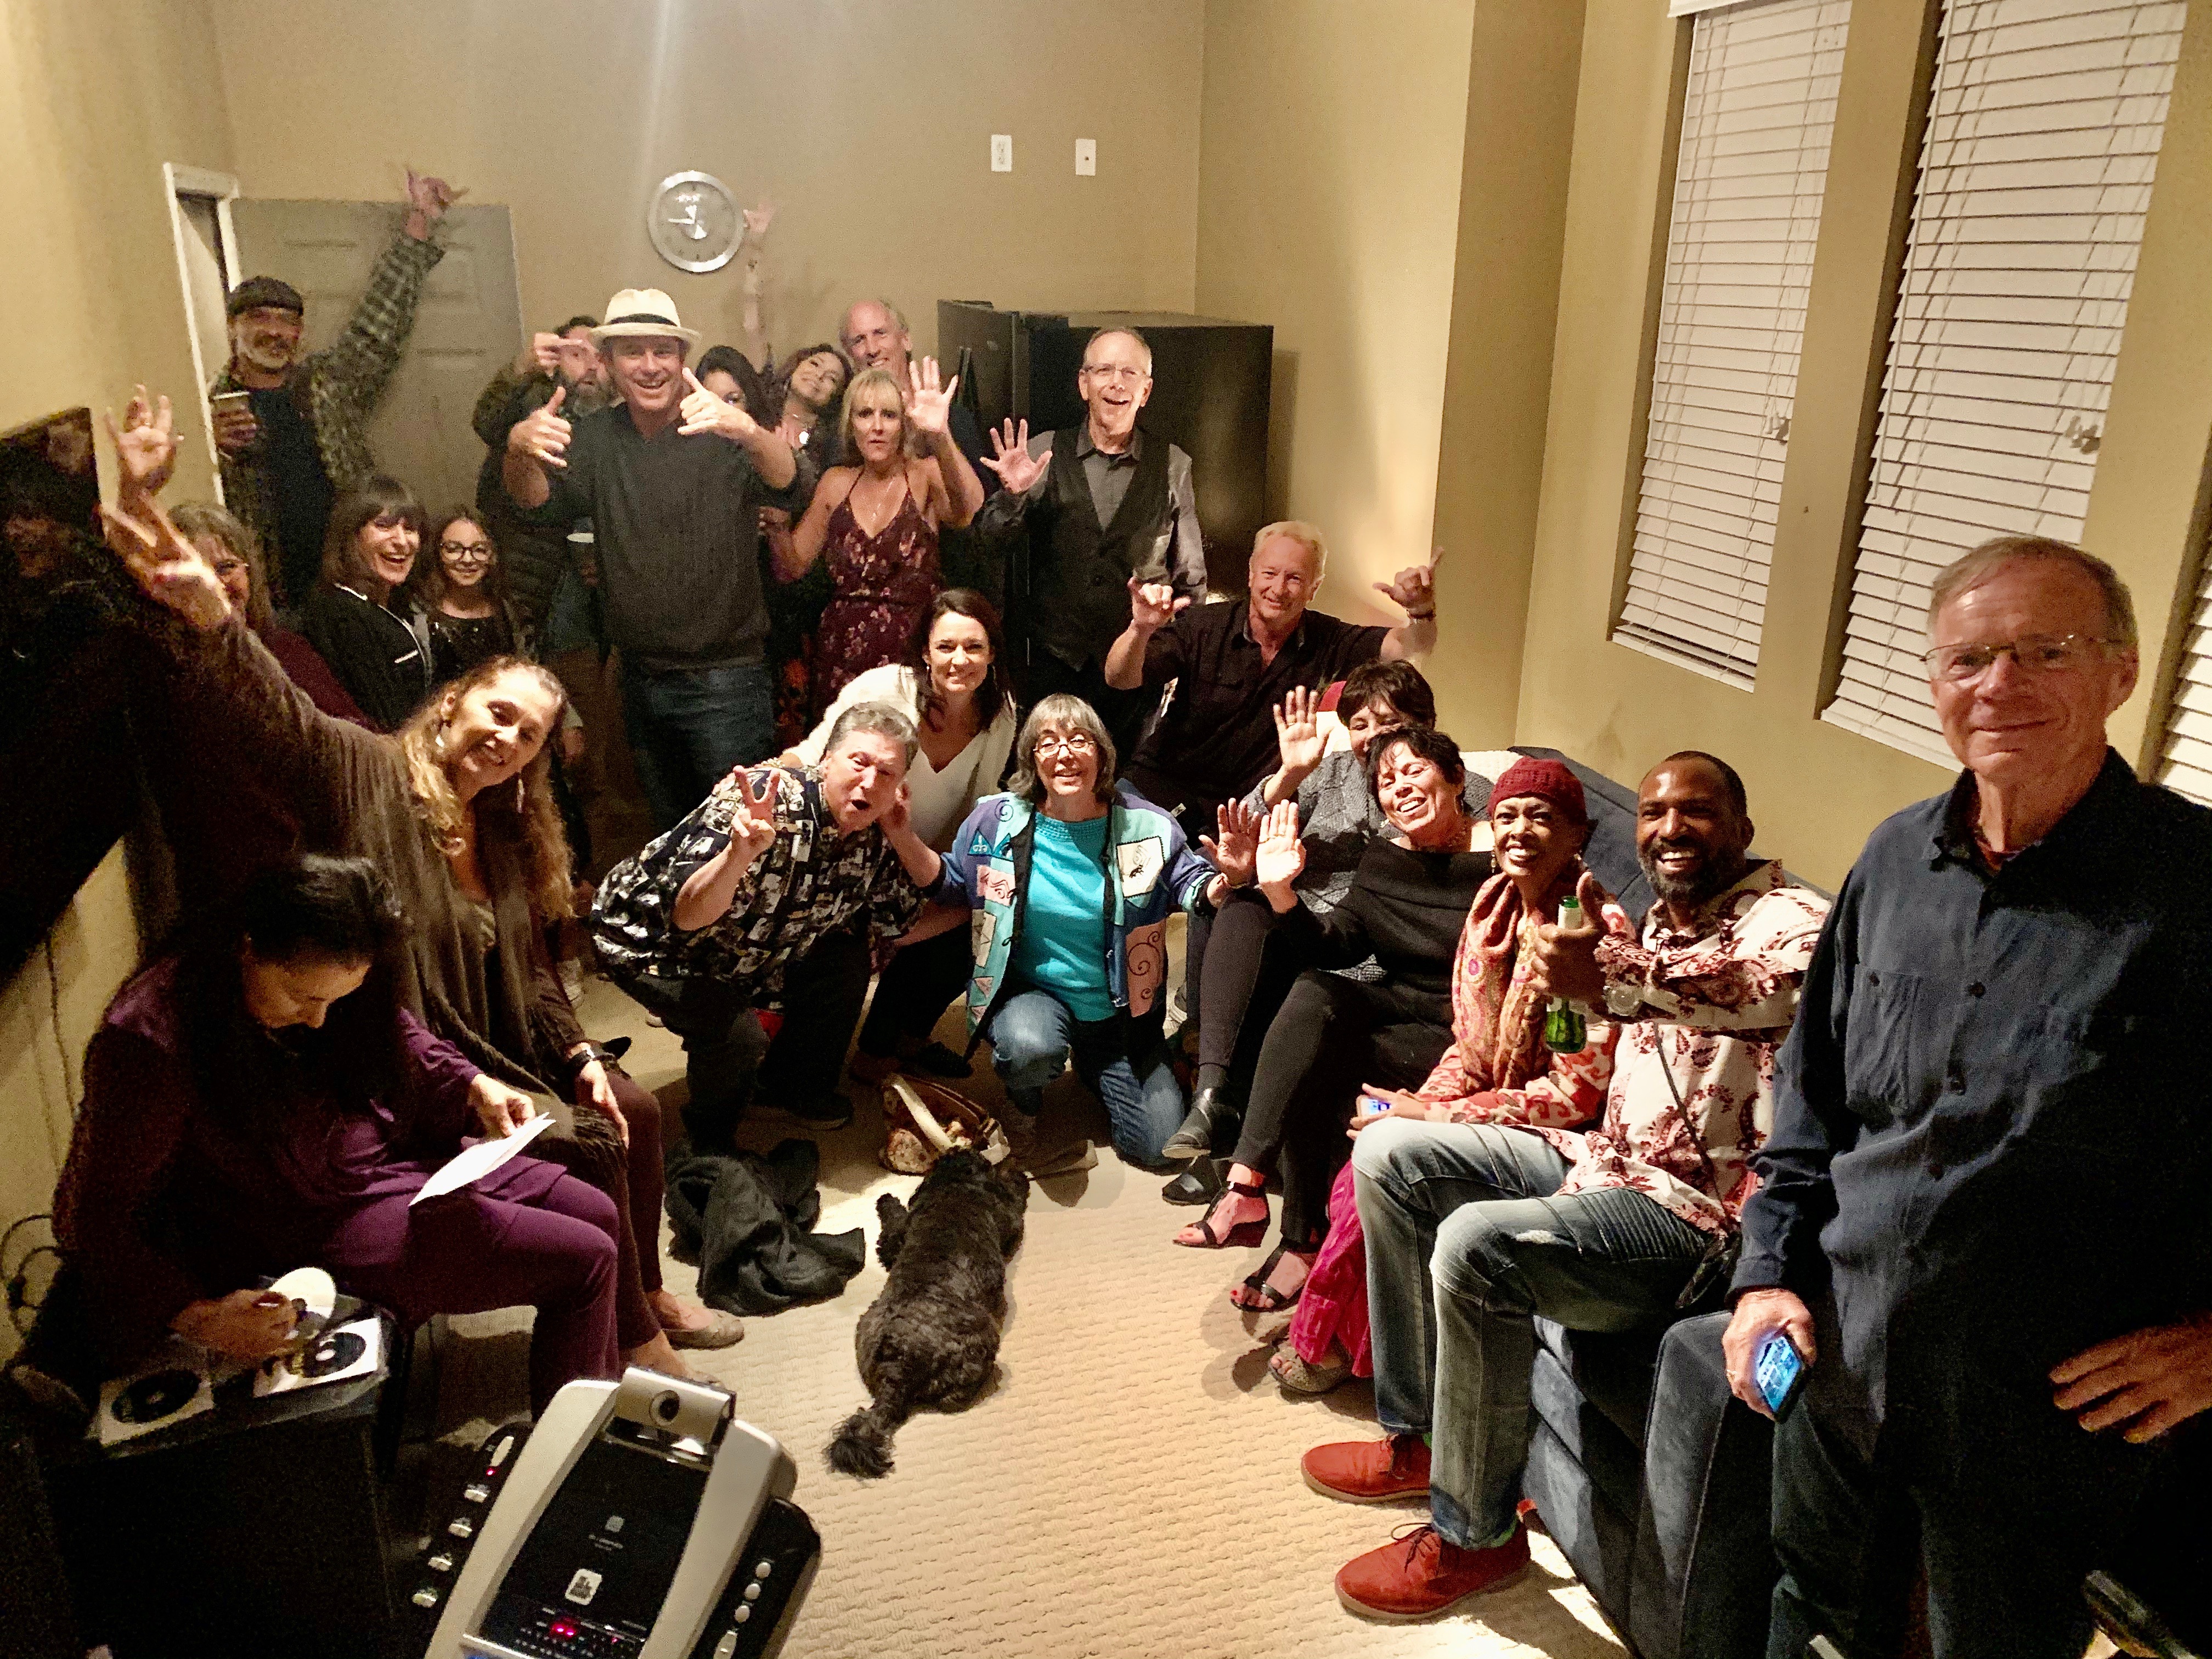 Group of people gathered at a party